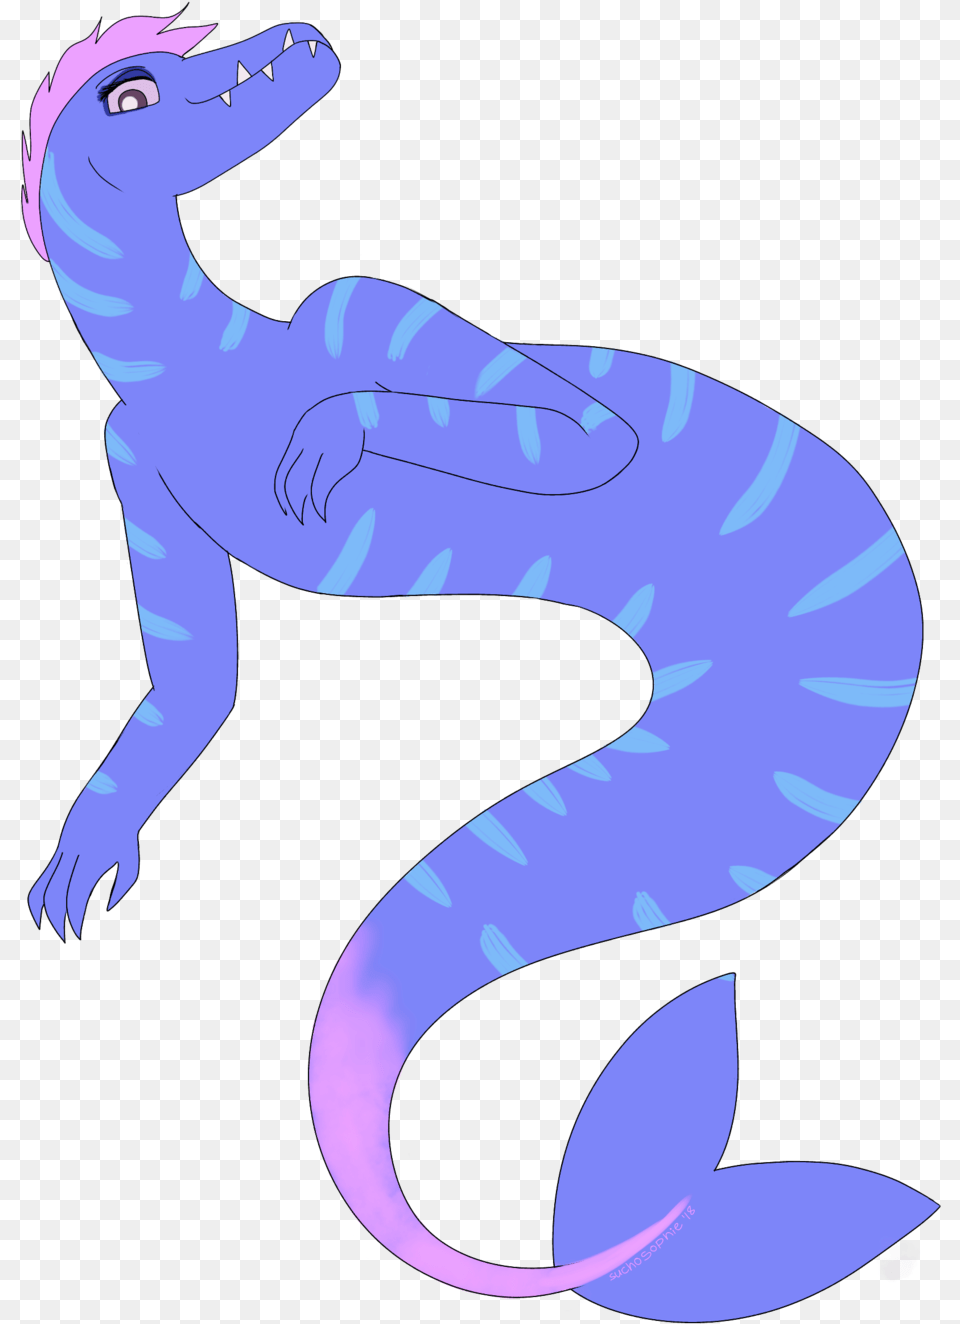 Guess Who Just Made A Redbubble Right Now This Mermaid Illustration, Animal, Fish, Sea Life, Shark Png Image